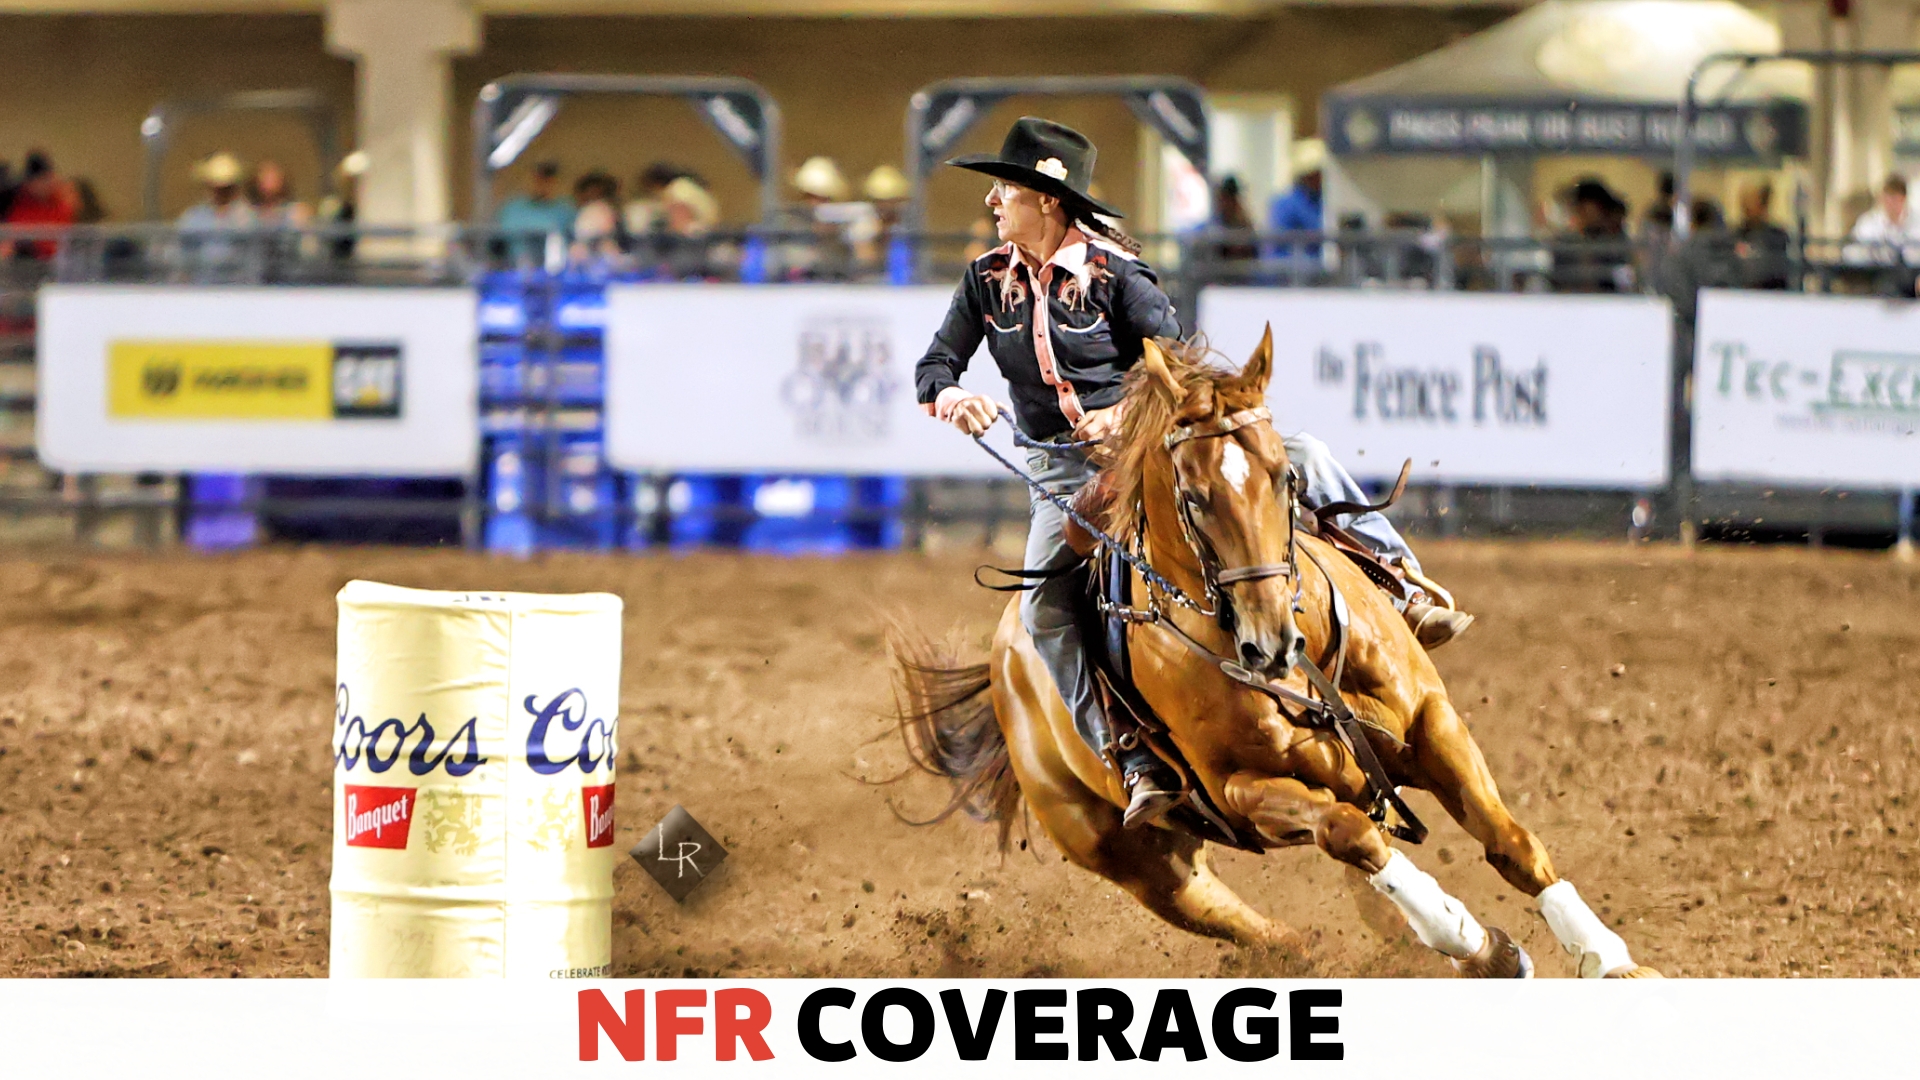 Nfr Barrel Racers: The Unstoppable Force in Equestrian Sports